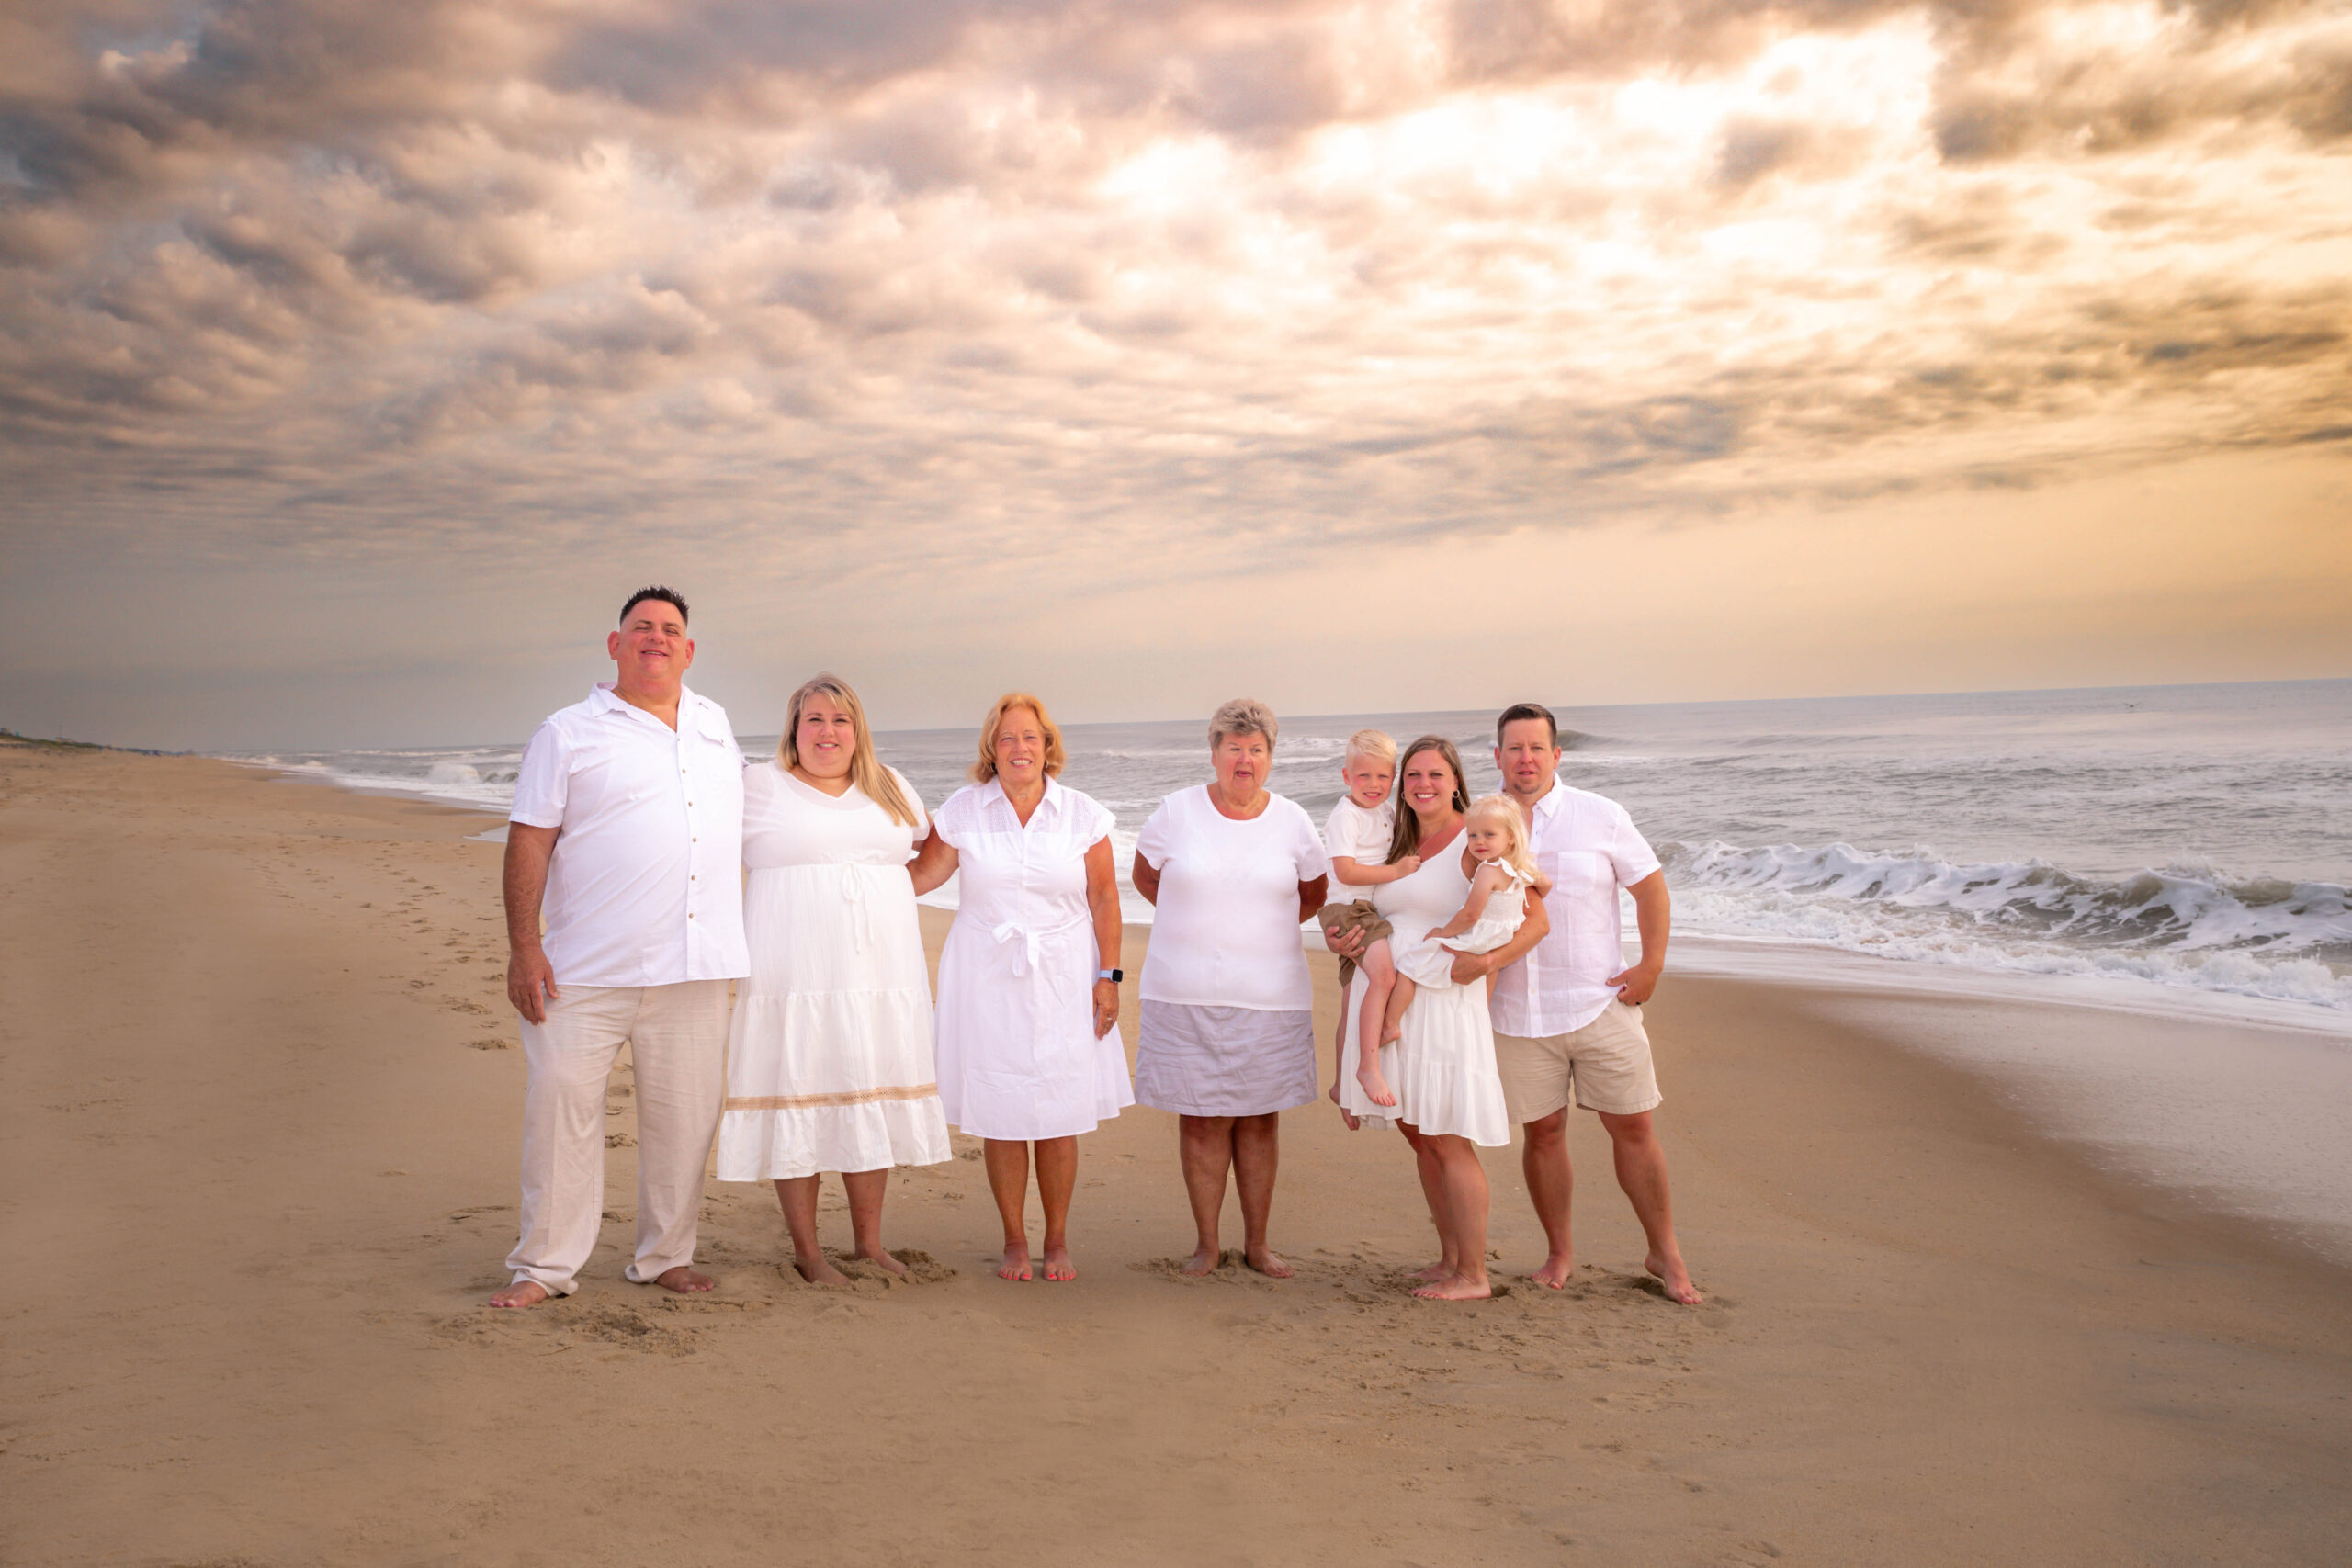 obx family beach photography and weddings mary ks photography obxfamily at sunrise in beach in outer banks obx nc